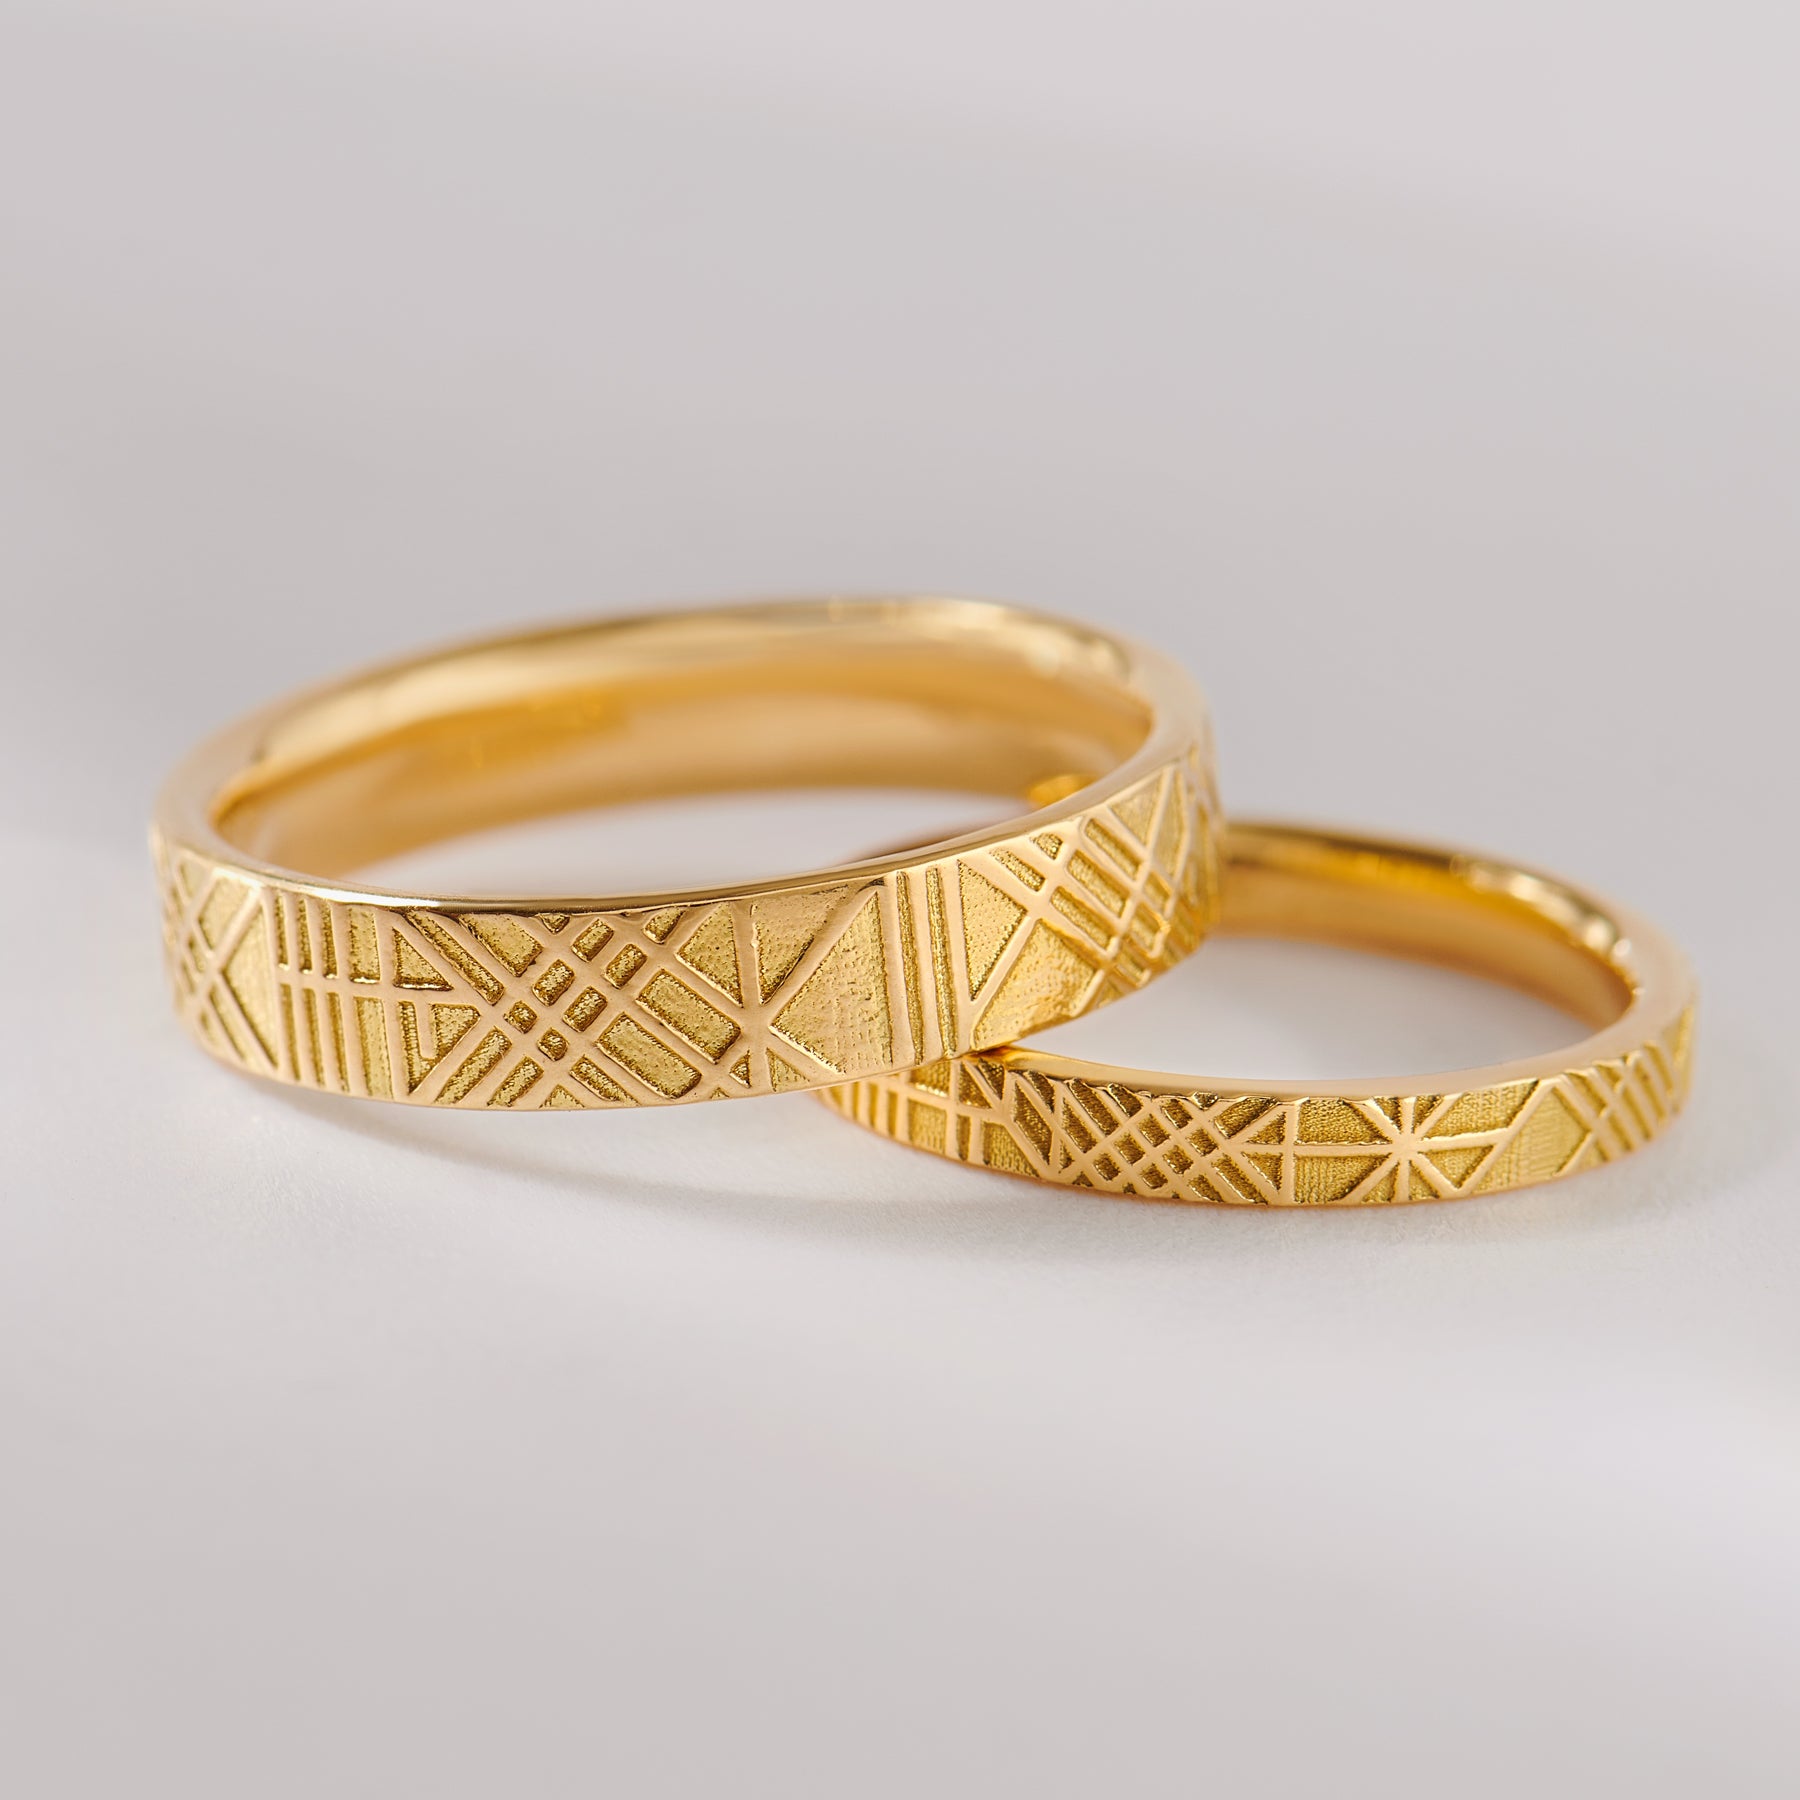 The-Unique-and-Geometric-Couple-A-Set-of-Golden-Wedding-Bands-closeup